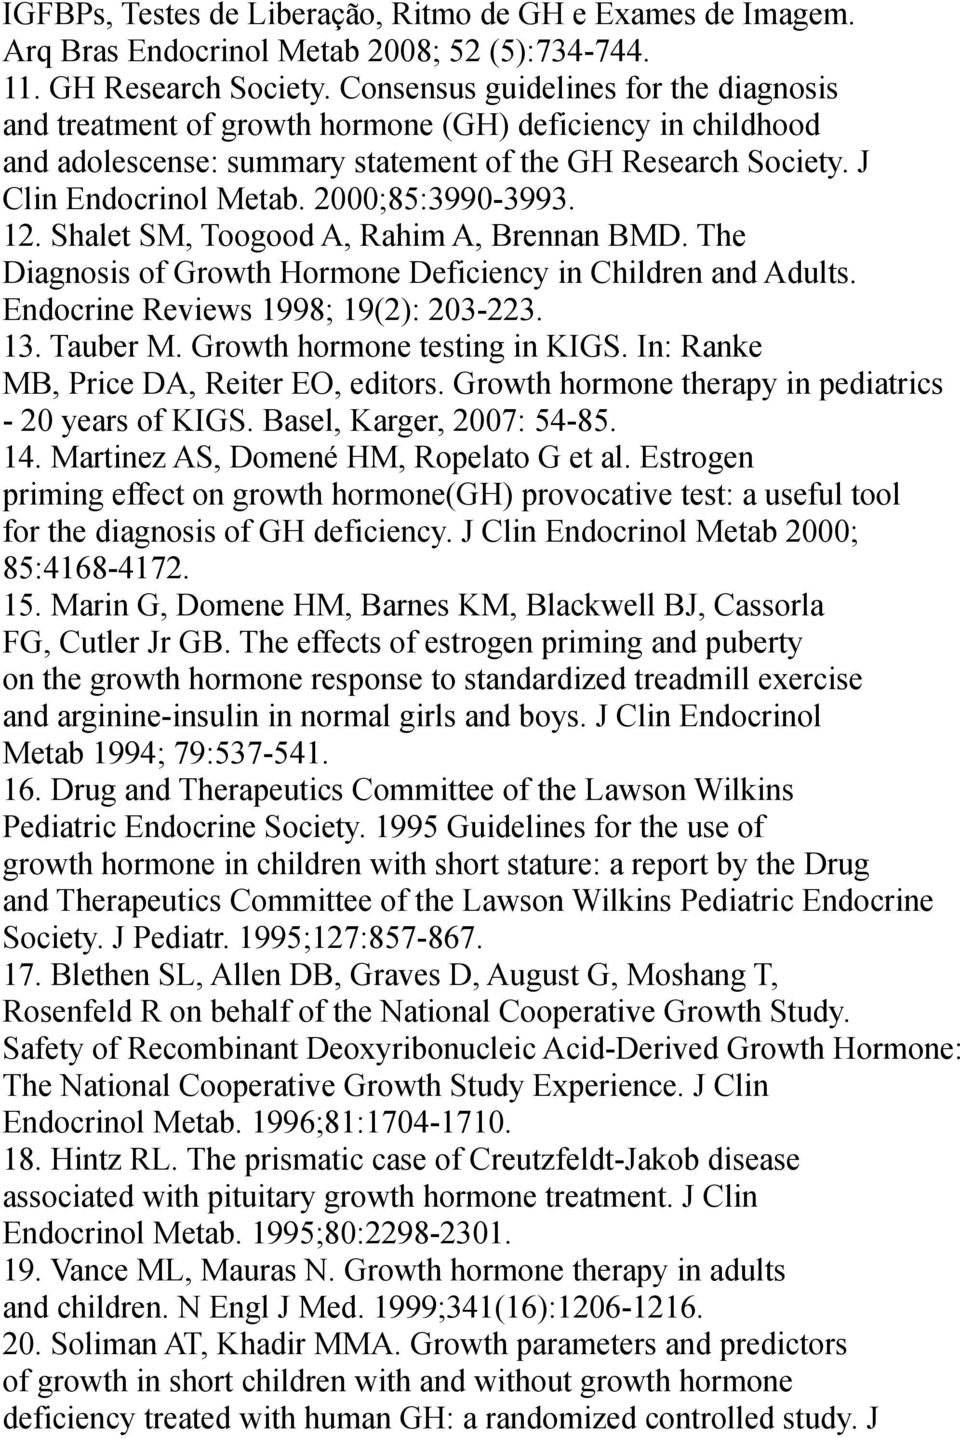 2000;85:3990-3993. 12. Shalet SM, Toogood A, Rahim A, Brennan BMD. The Diagnosis of Growth Hormone Deficiency in Children and Adults. Endocrine Reviews 1998; 19(2): 203-223. 13. Tauber M.